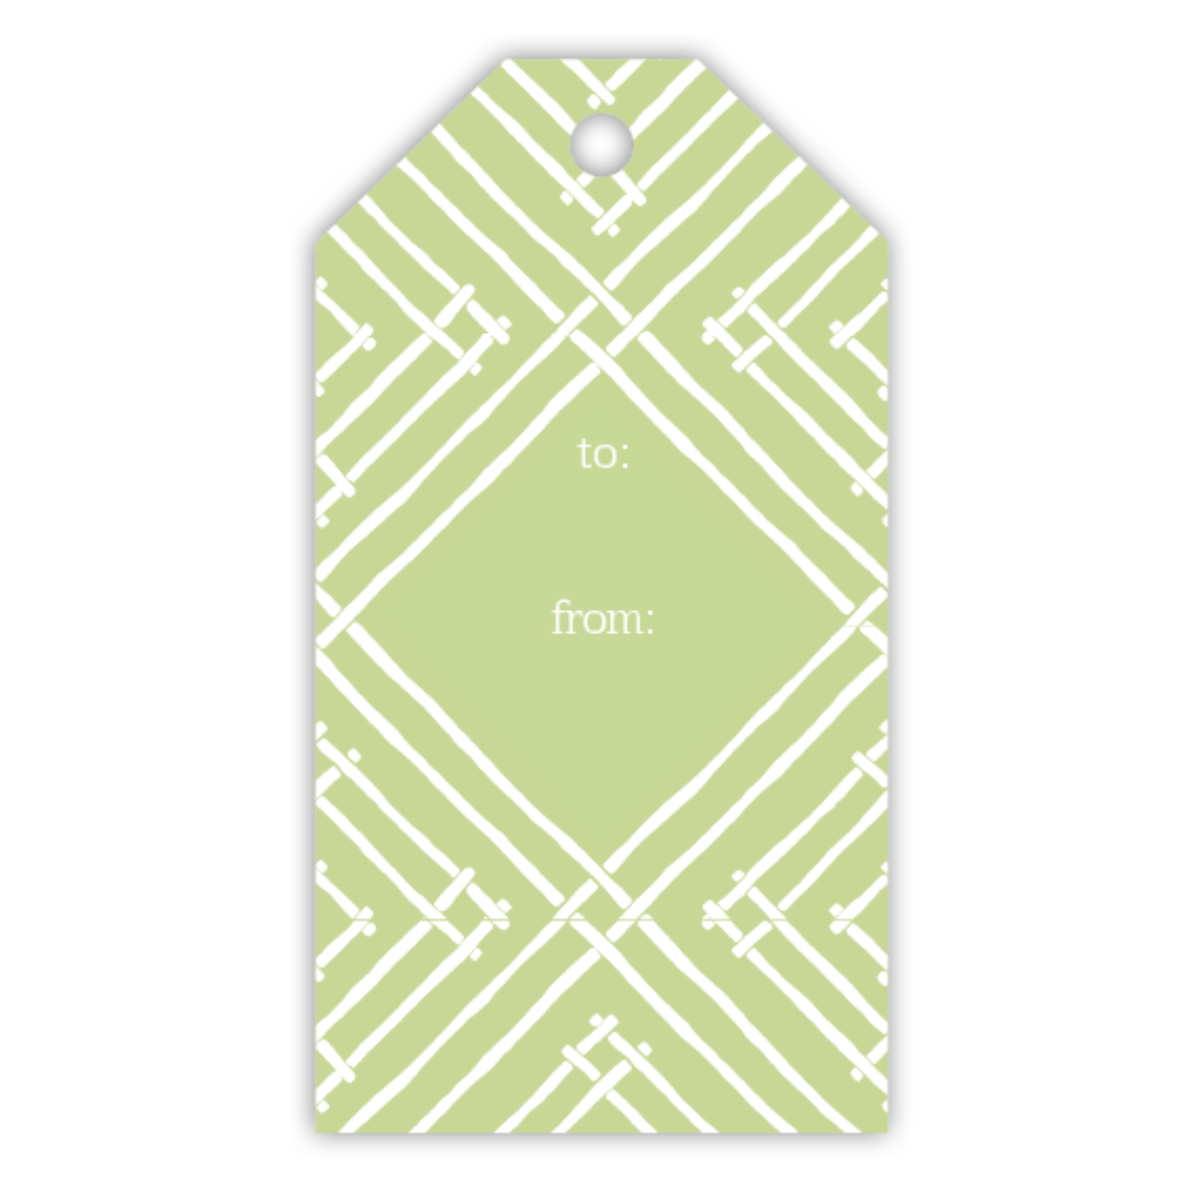 Celery Green Island House Gift Tags, Pack of 10